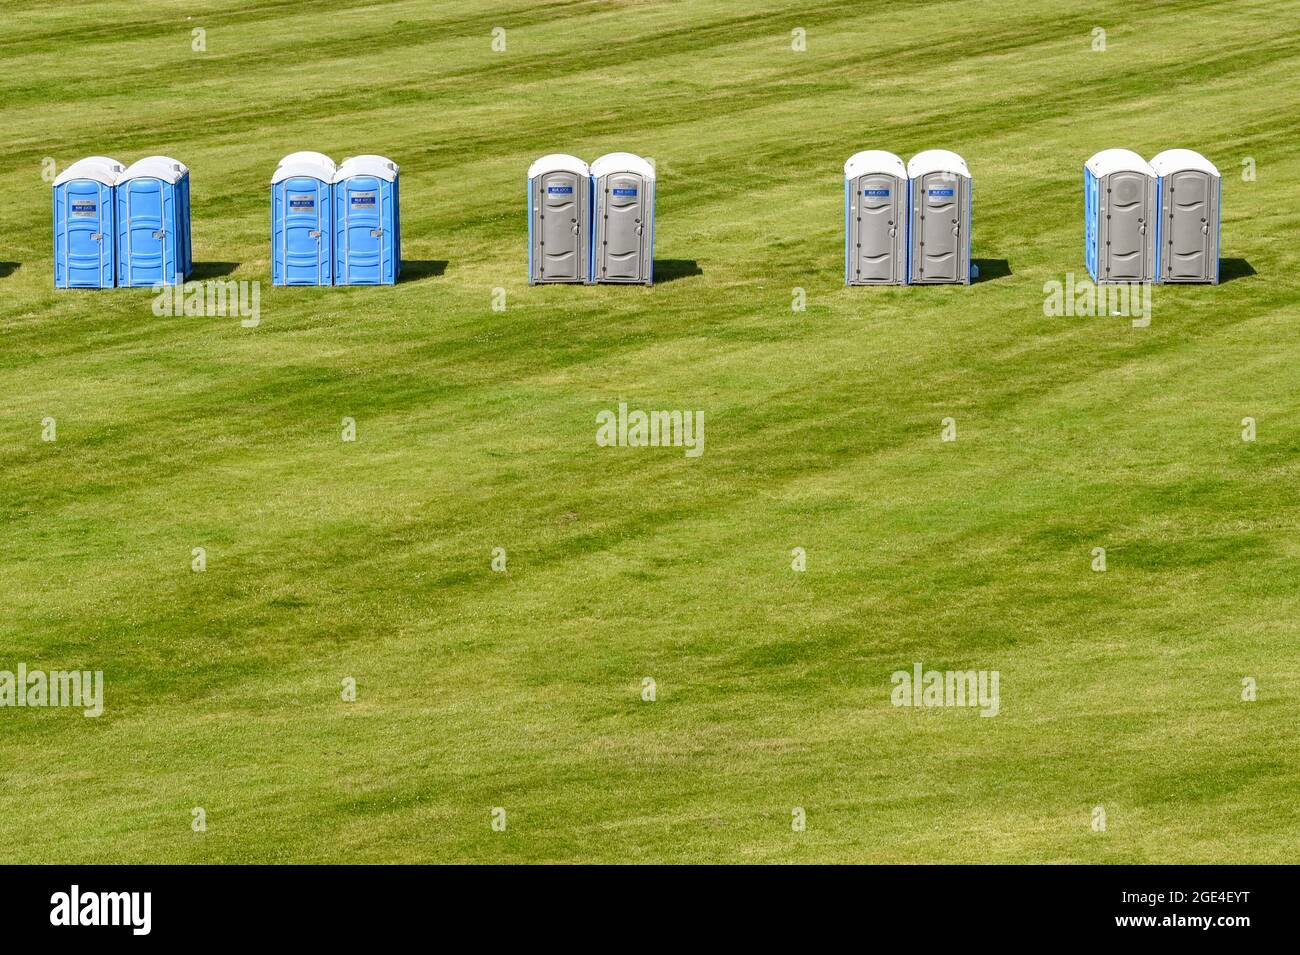 Chester, Cheshire, England - July 2021: Row of portable toilets on the racecourse in preparation for an event Stock Photo